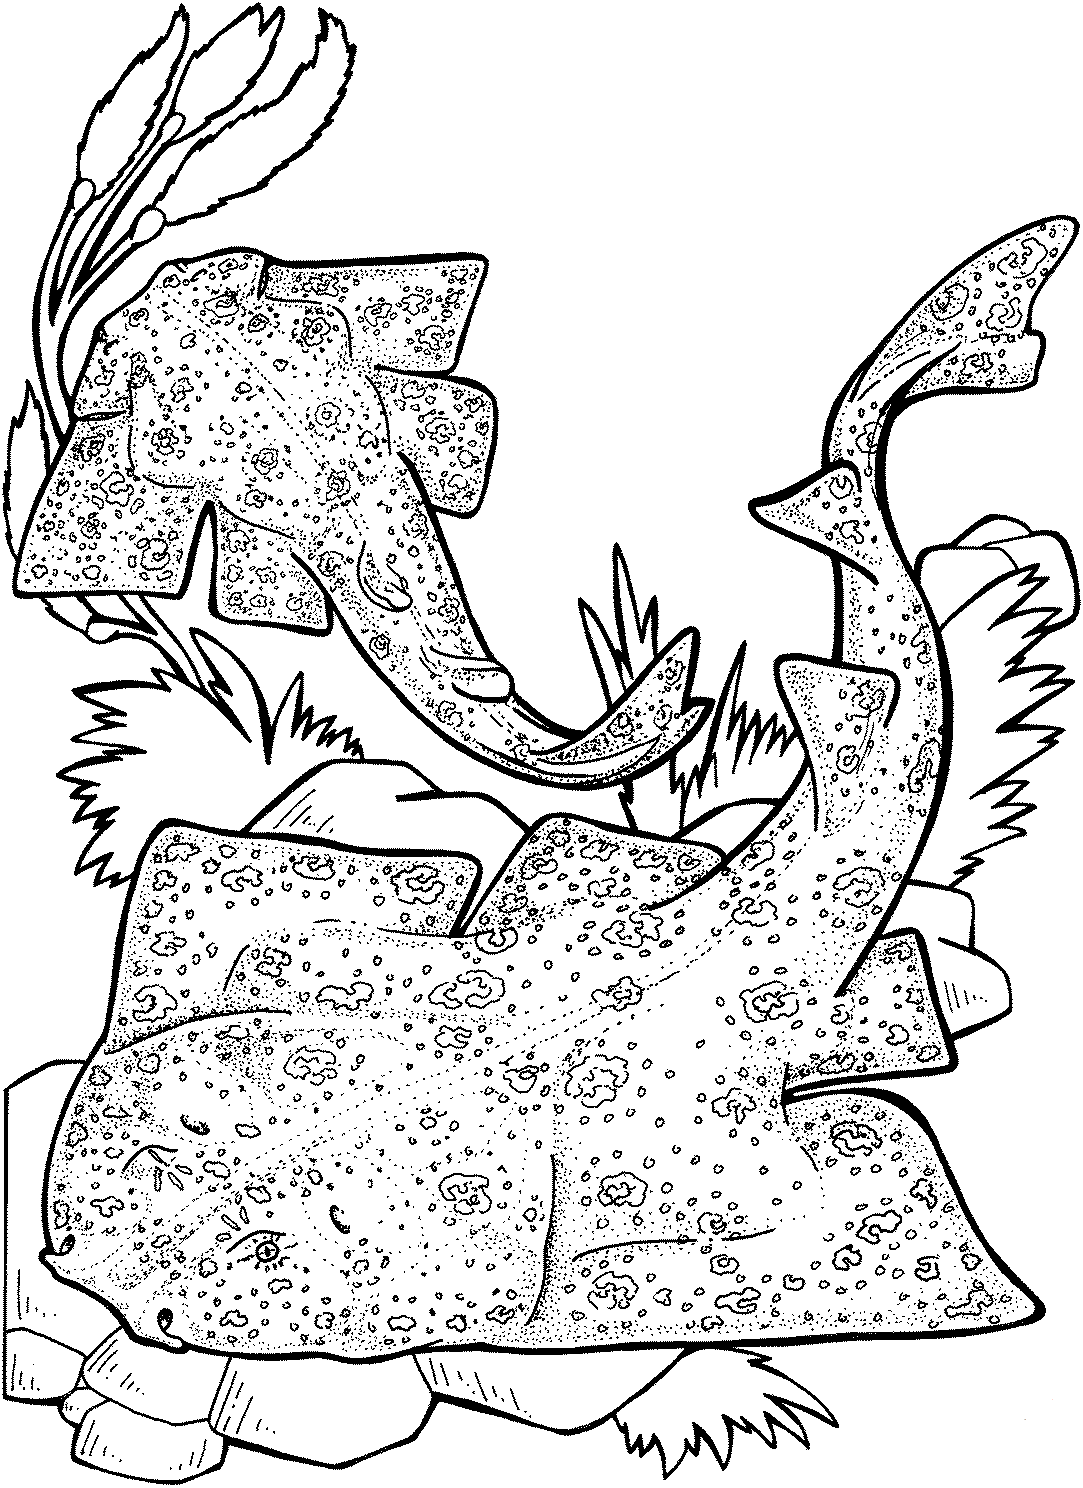 Angel Shark Coloring Page